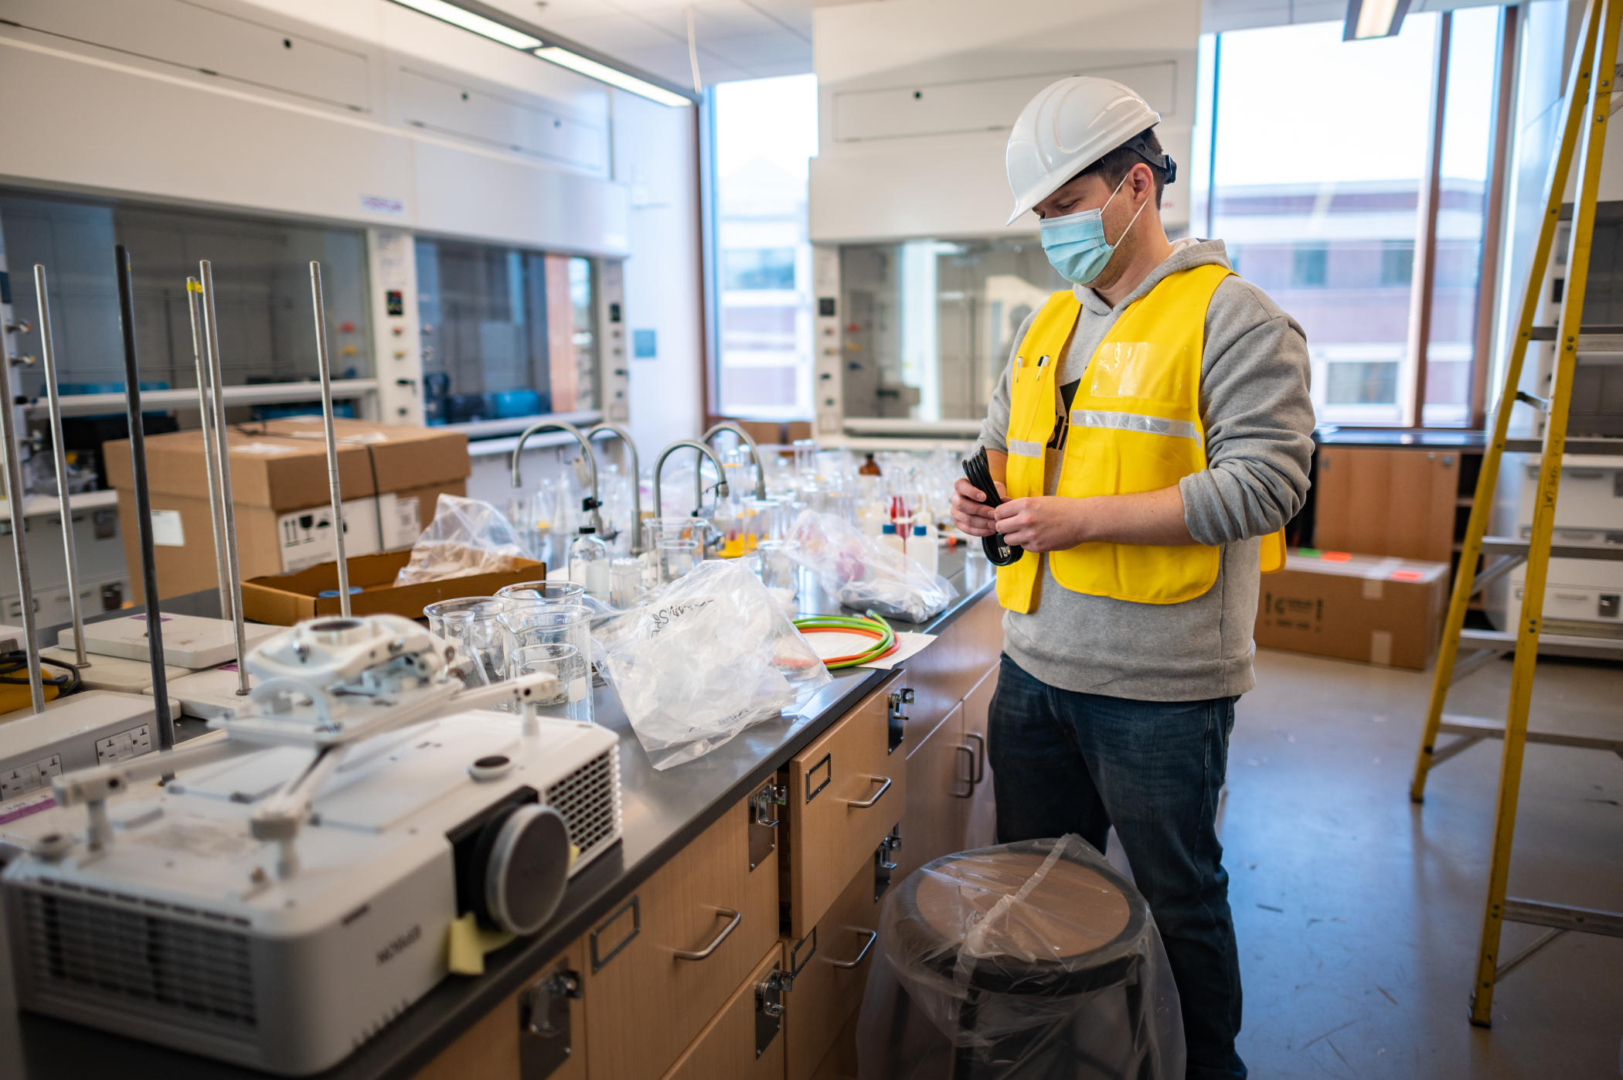 A person in a hard hat unwraps lab technology such as beakers and other tools in a new laboratory classroom.